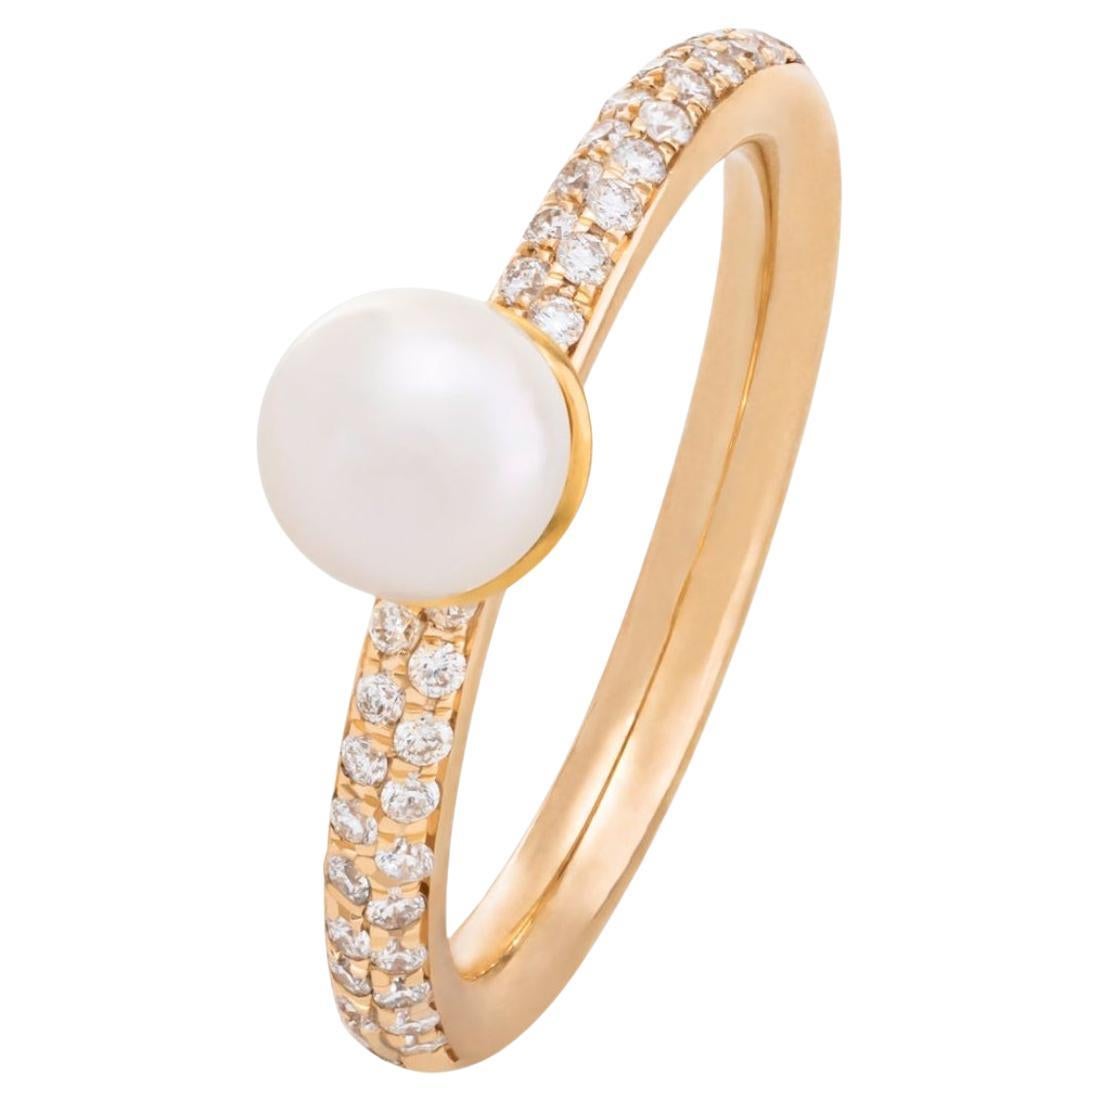 Paris & Lily, Handmade 22K & 14K Gold, Pearl Ring with Diamonds For Sale